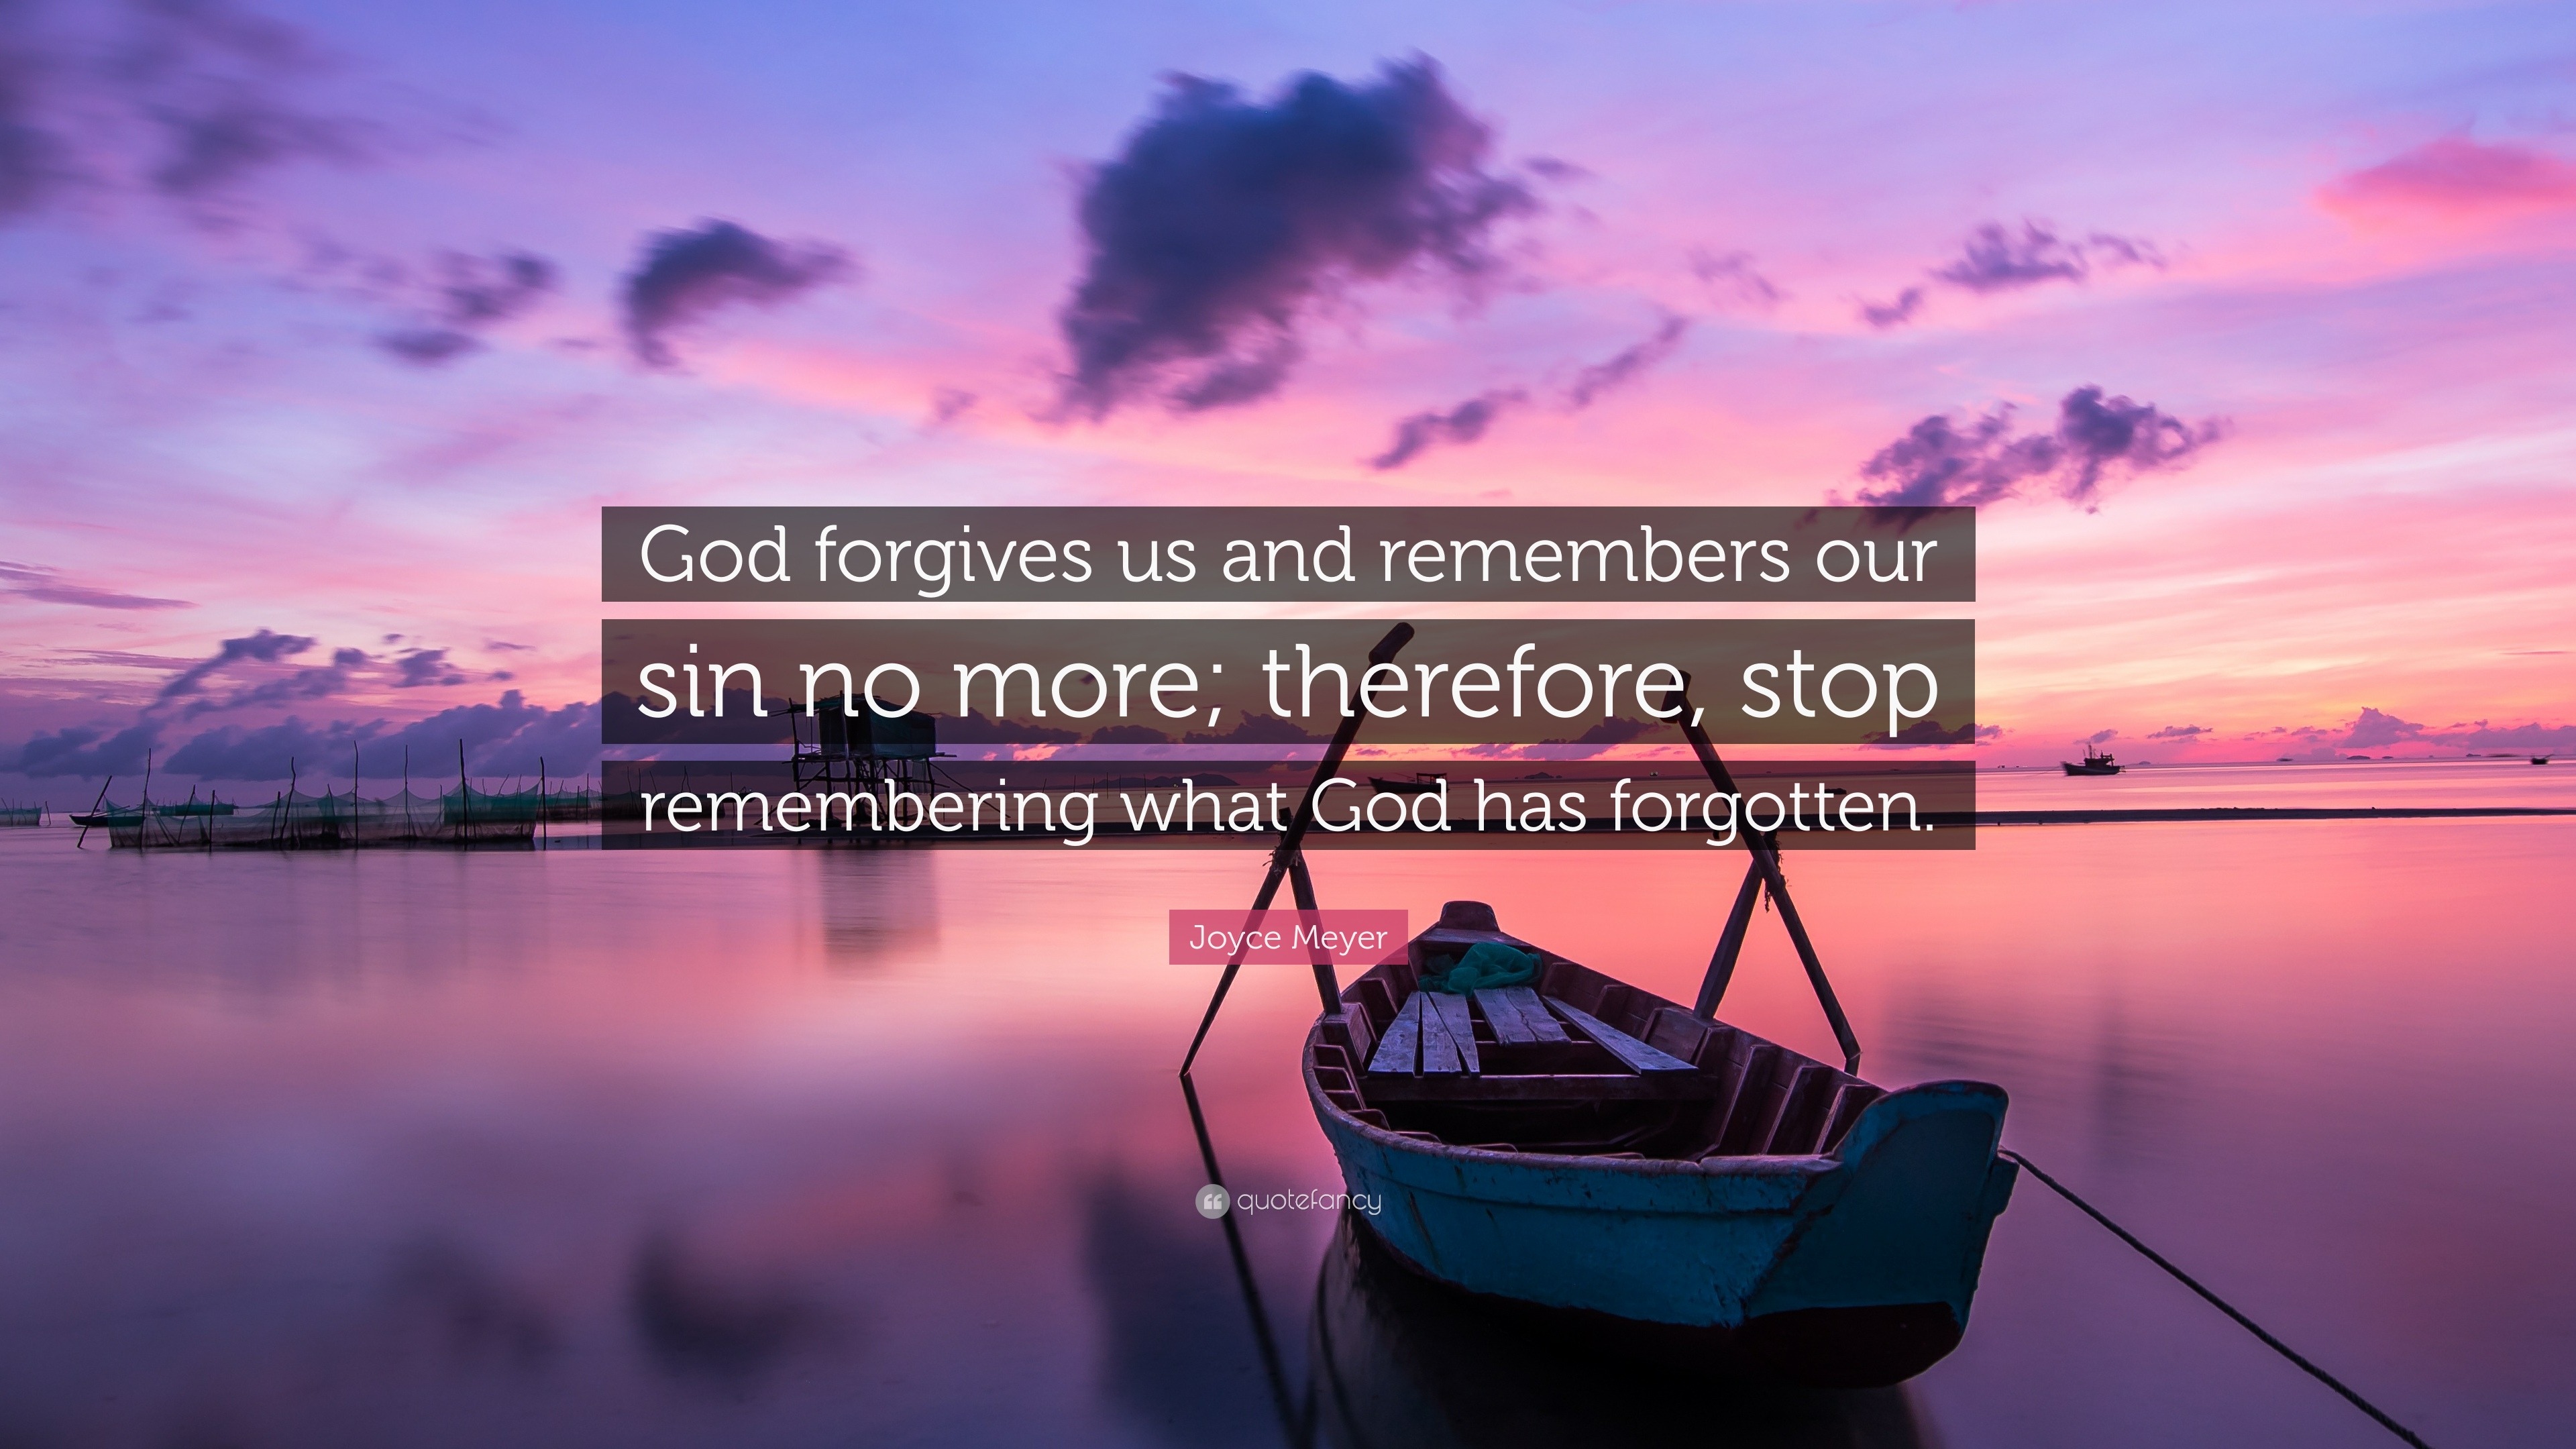 The Sea Of Forgetfulness / Sins Are Lost / When God For Gives Us  #ubeingsaved 